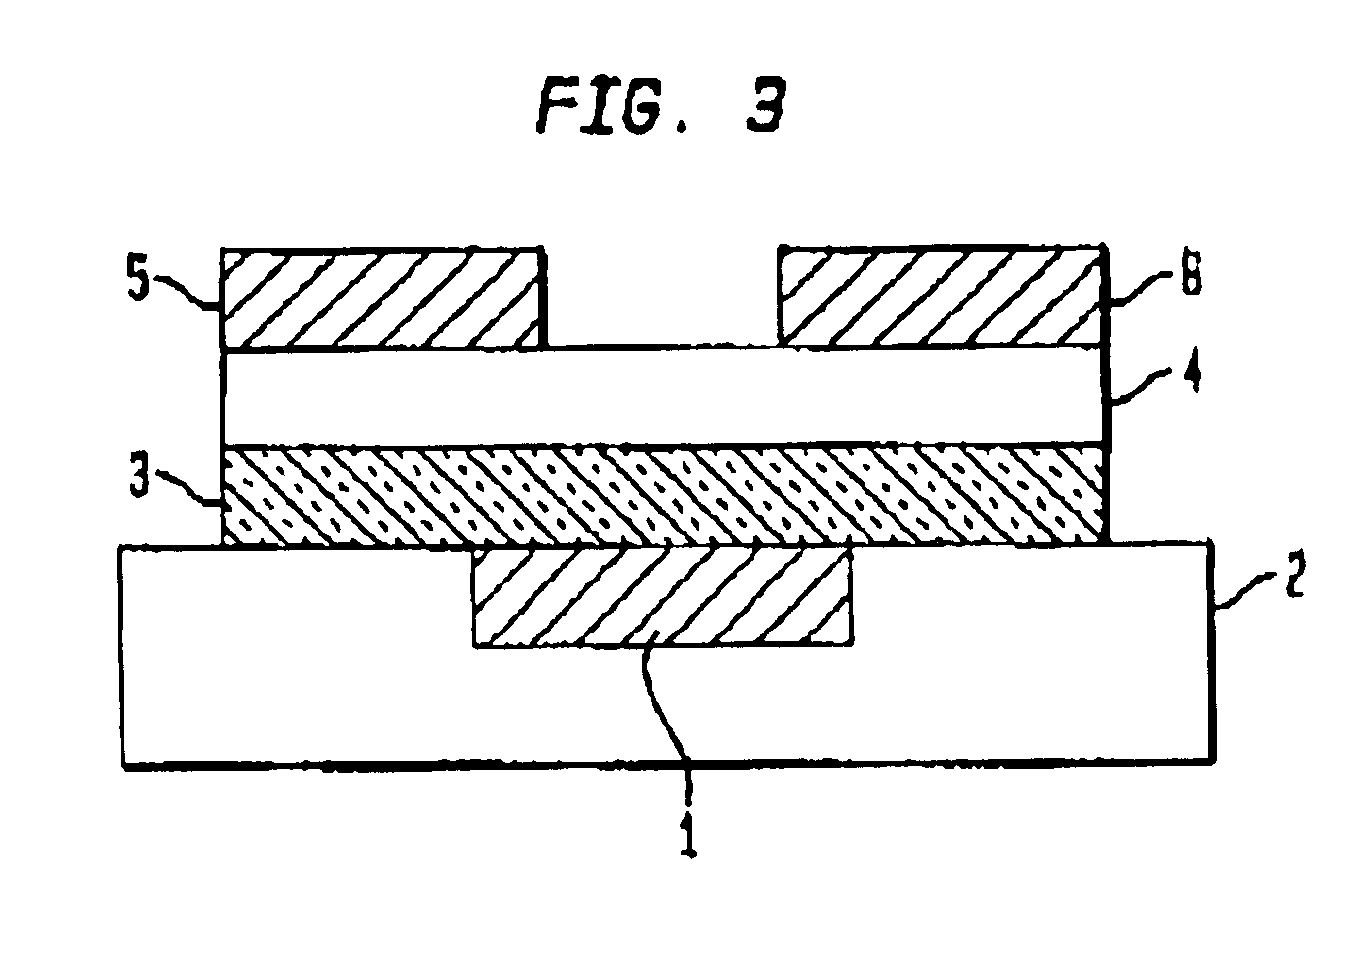 Organic semiconductor device having an active dielectric layer comprising silsesquioxanes